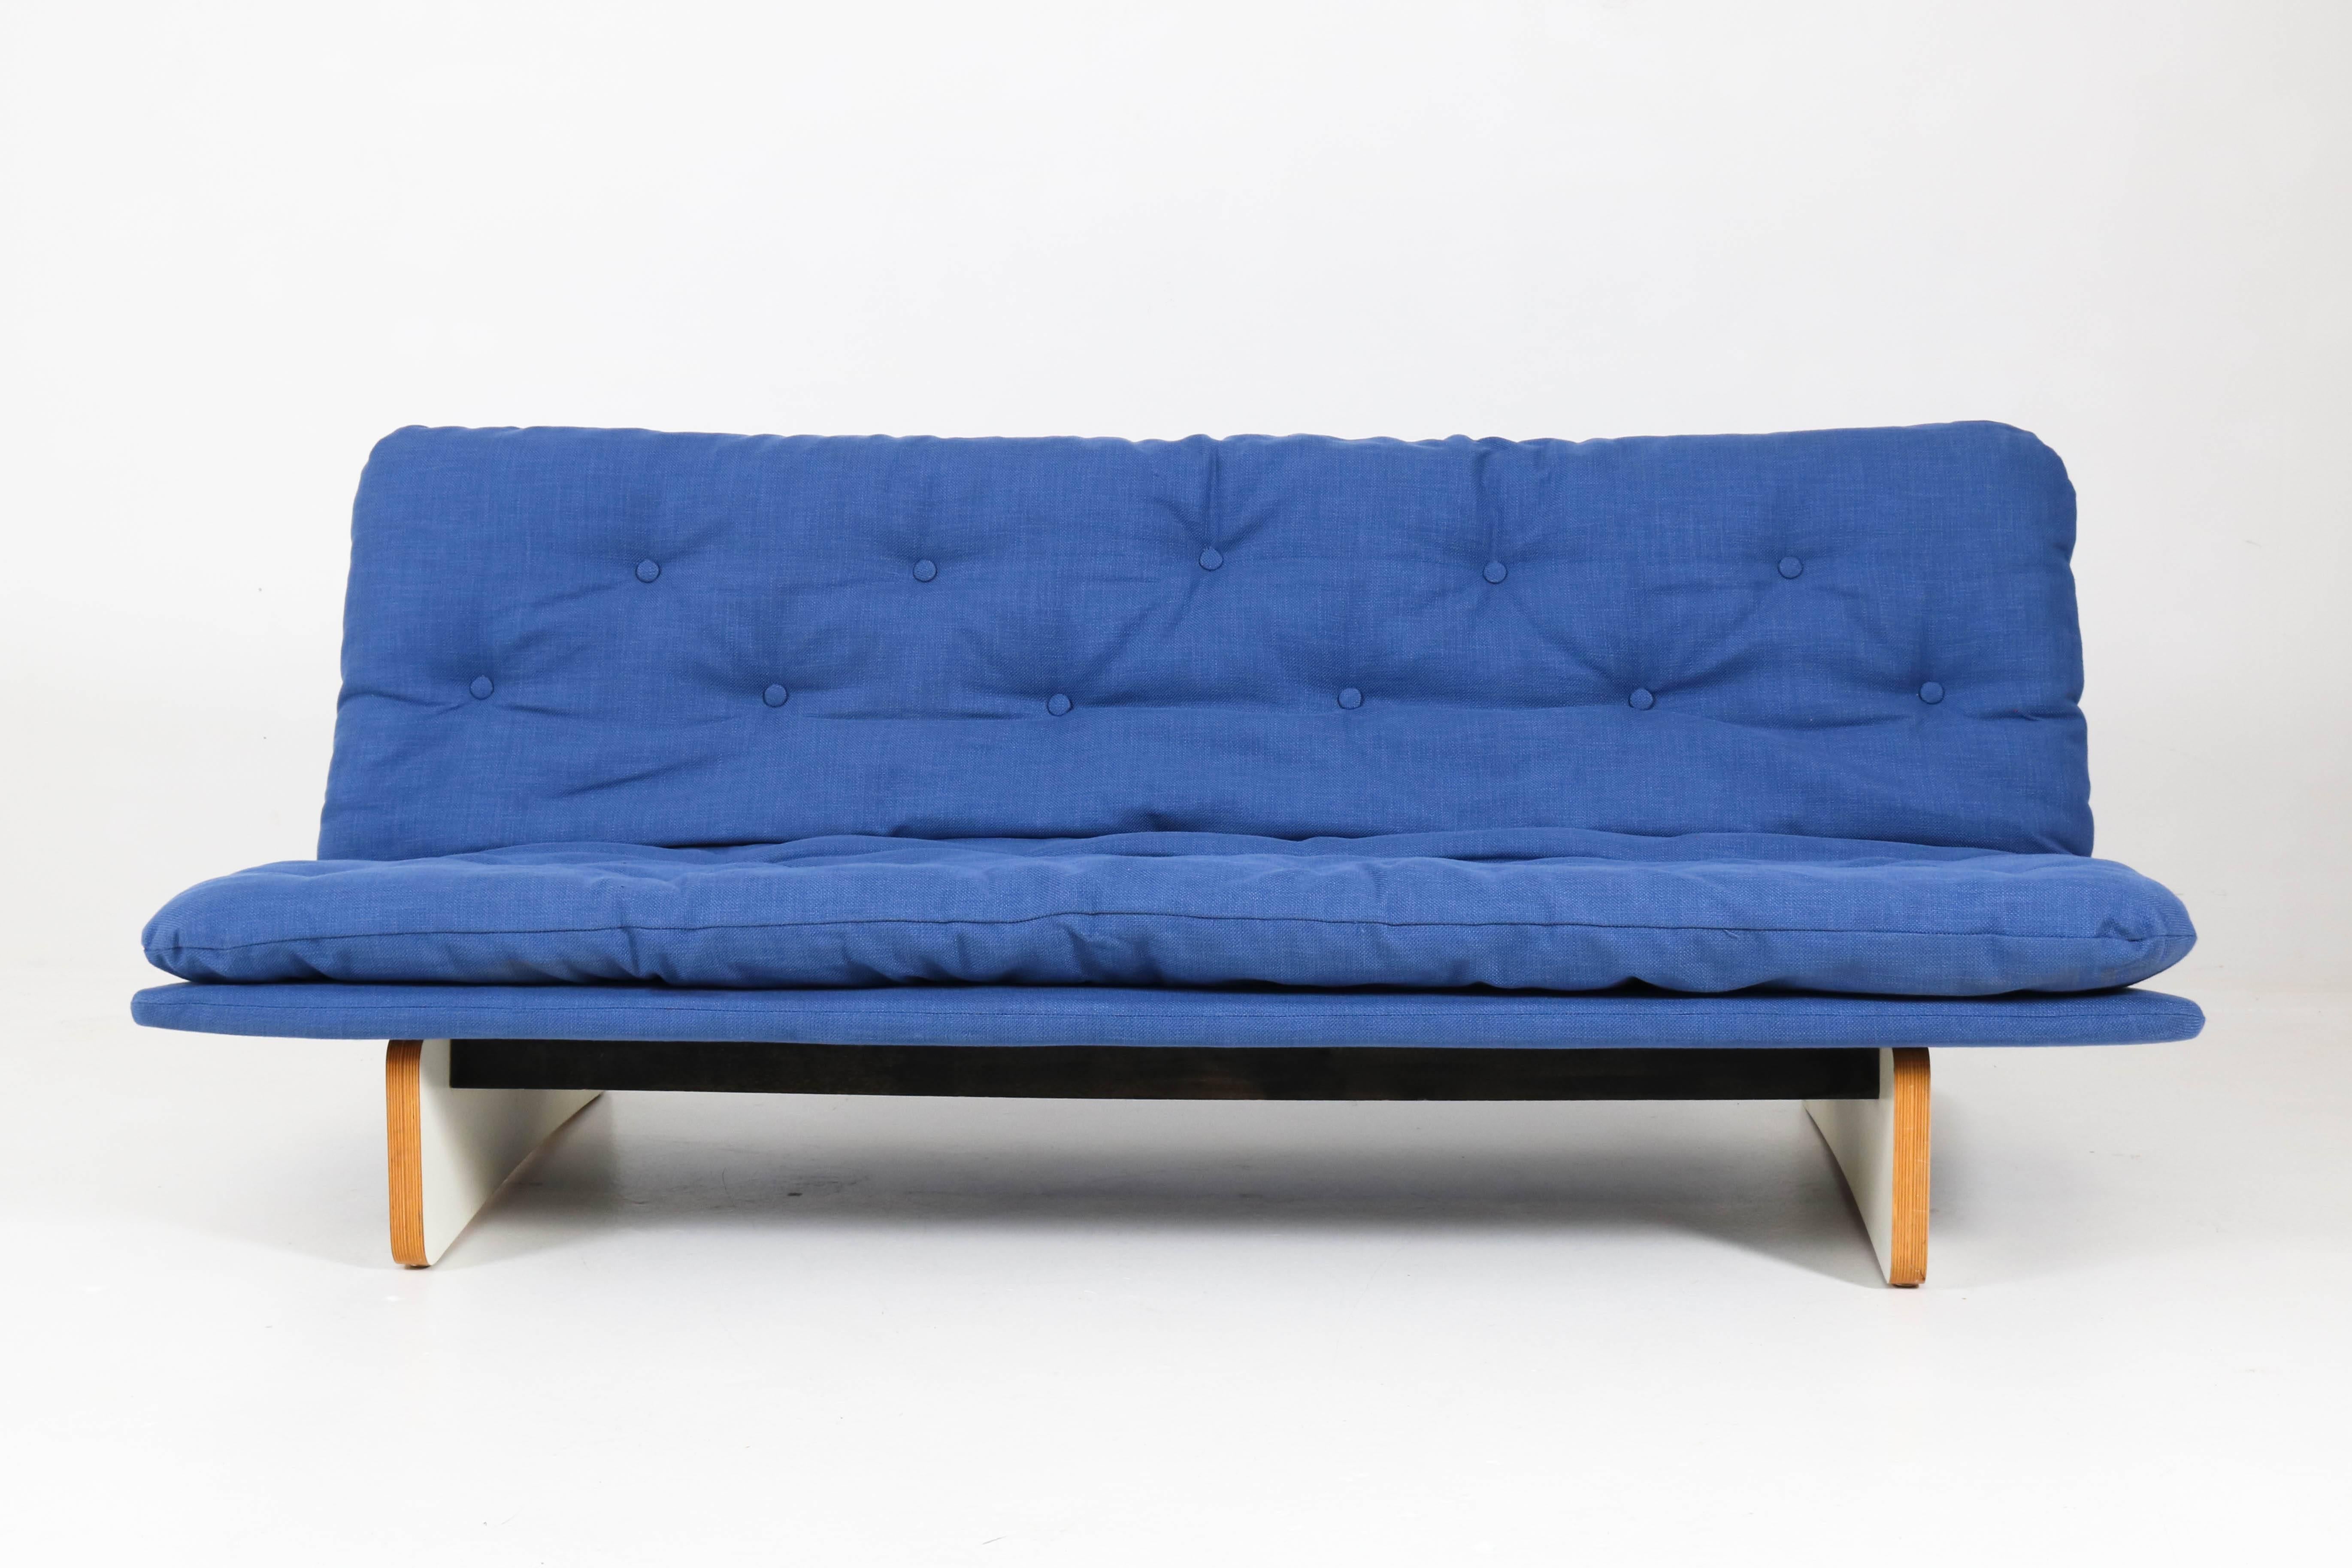 Funky Mid-Century Modern sofa 671 by Kho Liang Le for Artifort.
Striking Dutch design from the 1960s.
White laminated plywood base with re-upholstered wooden seating.
Marked with metal tag Artifort.
Re-upholstered cushion with new blue Italian